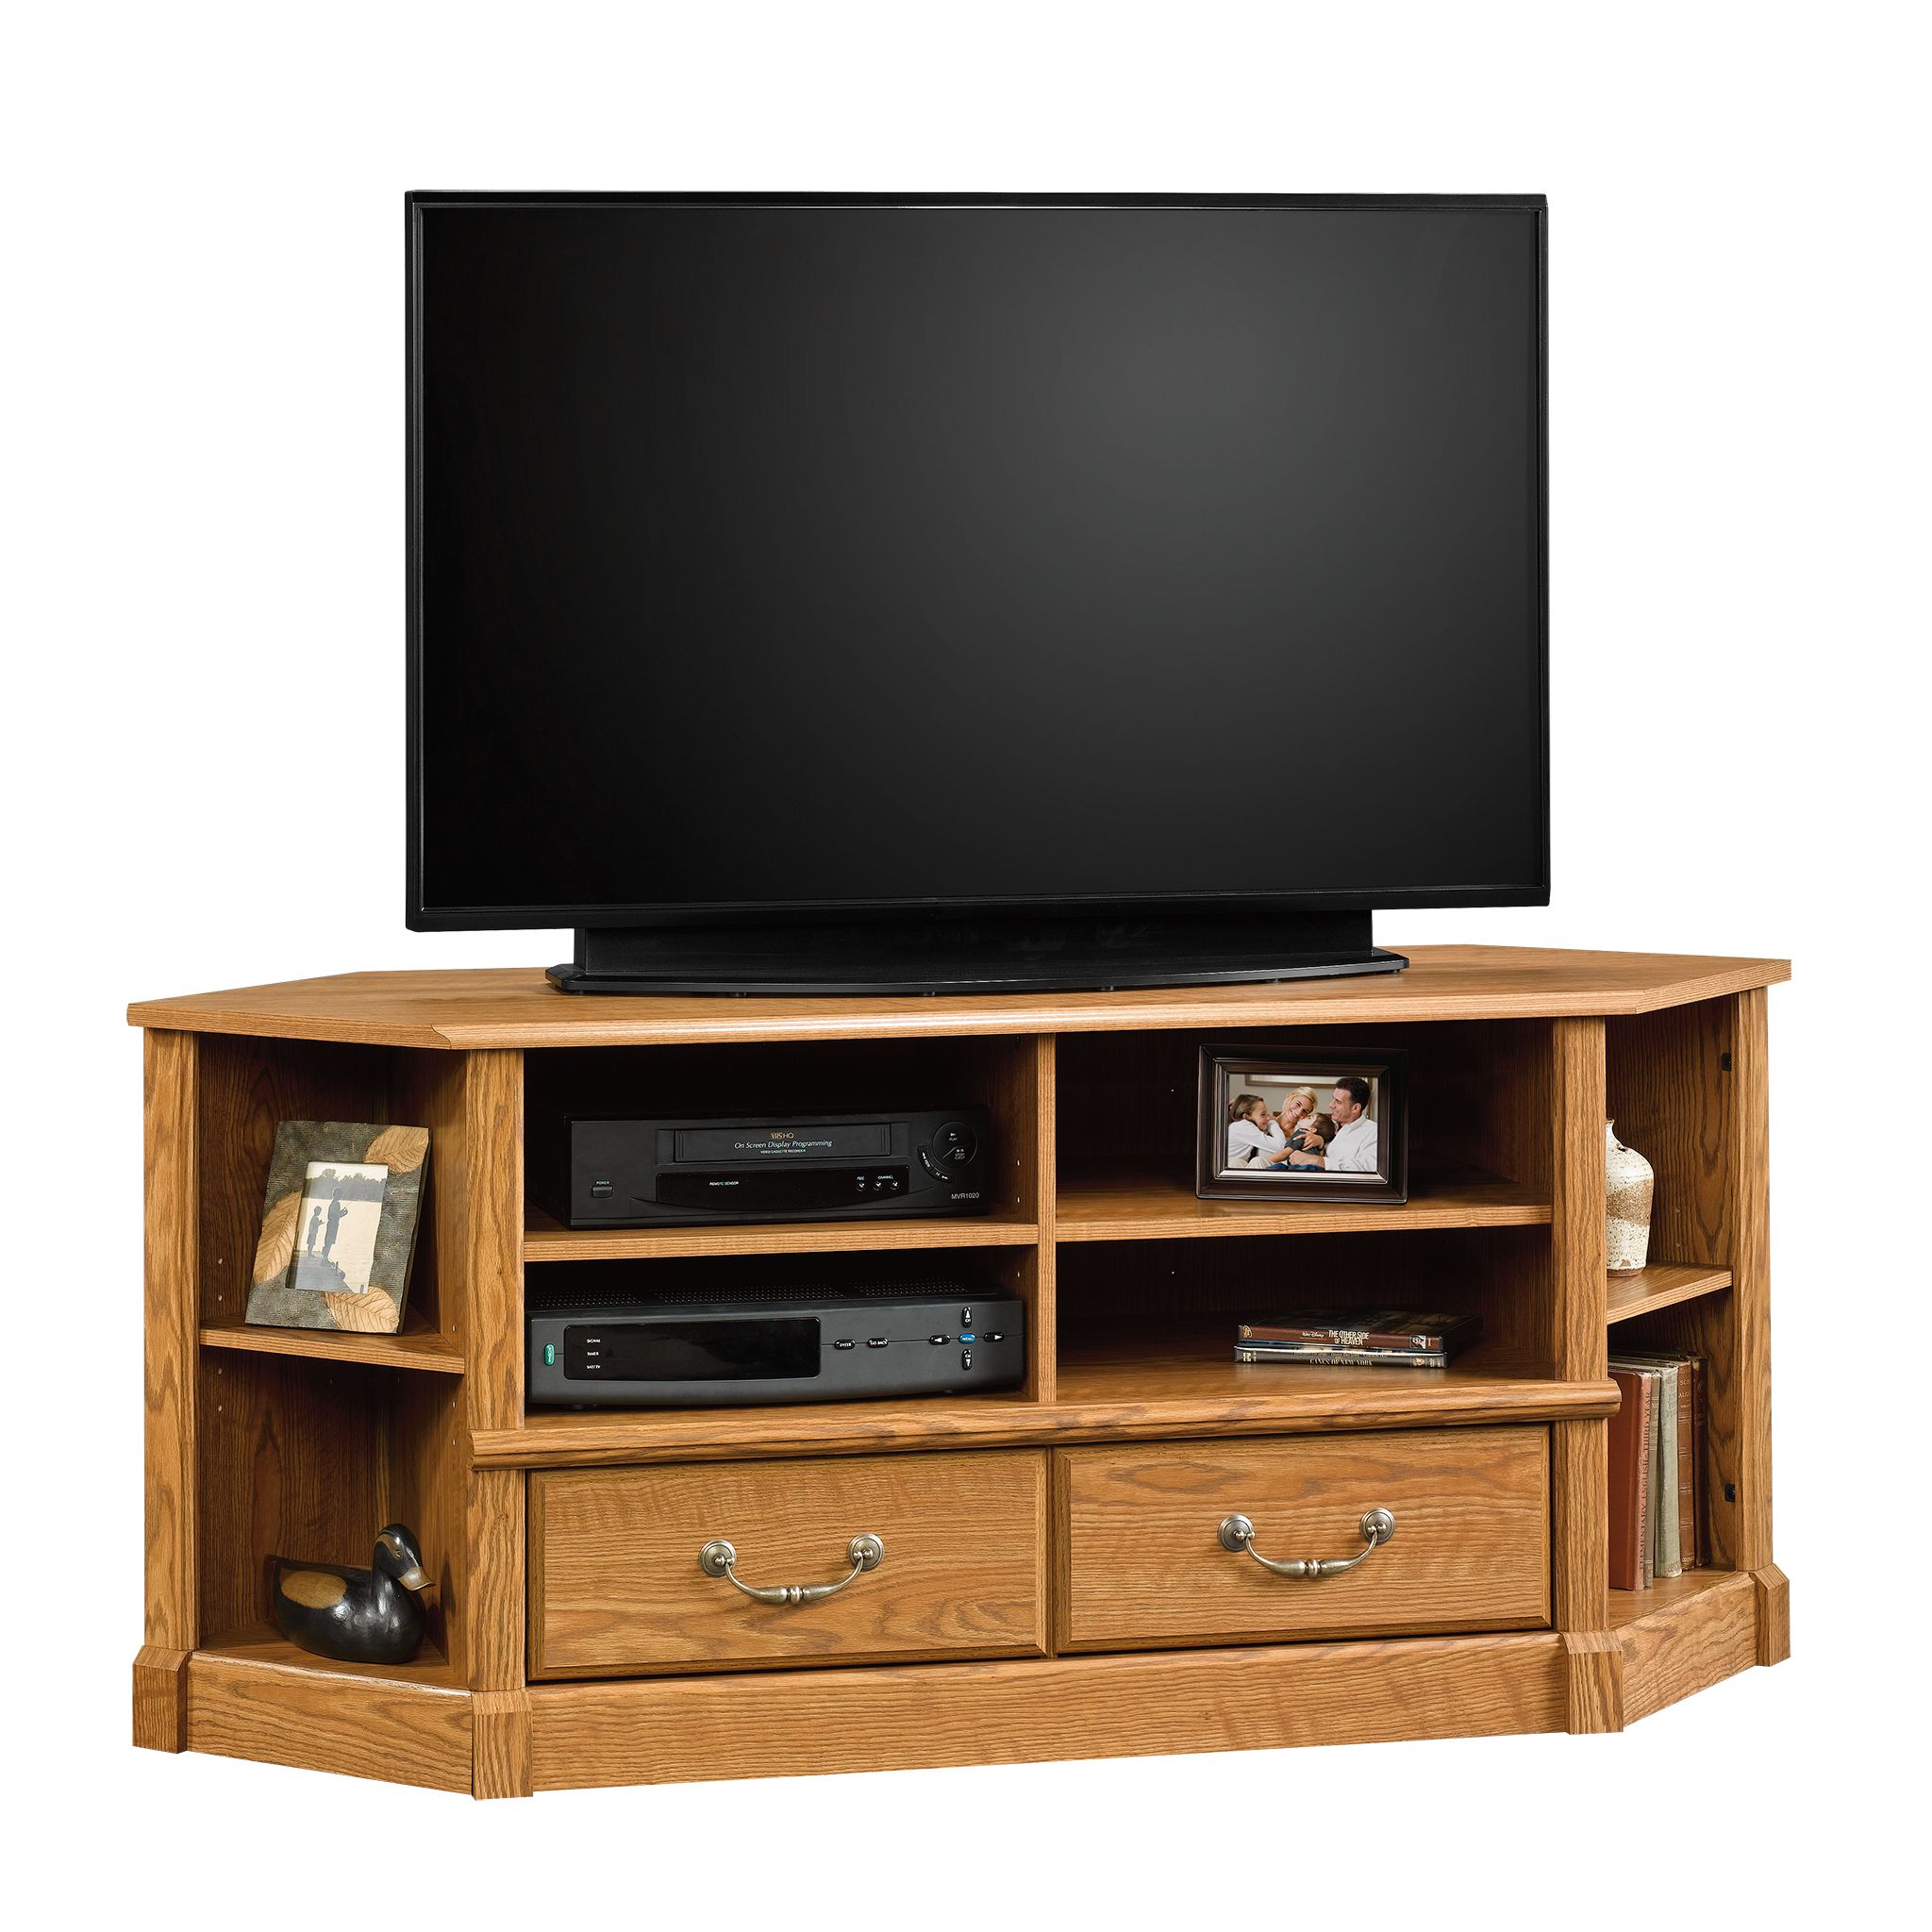 Sauder Orchard Hills Corner Tv Stand For Tvs Up To 50 Intended For Lansing Tv Stands For Tvs Up To 50" (View 9 of 15)